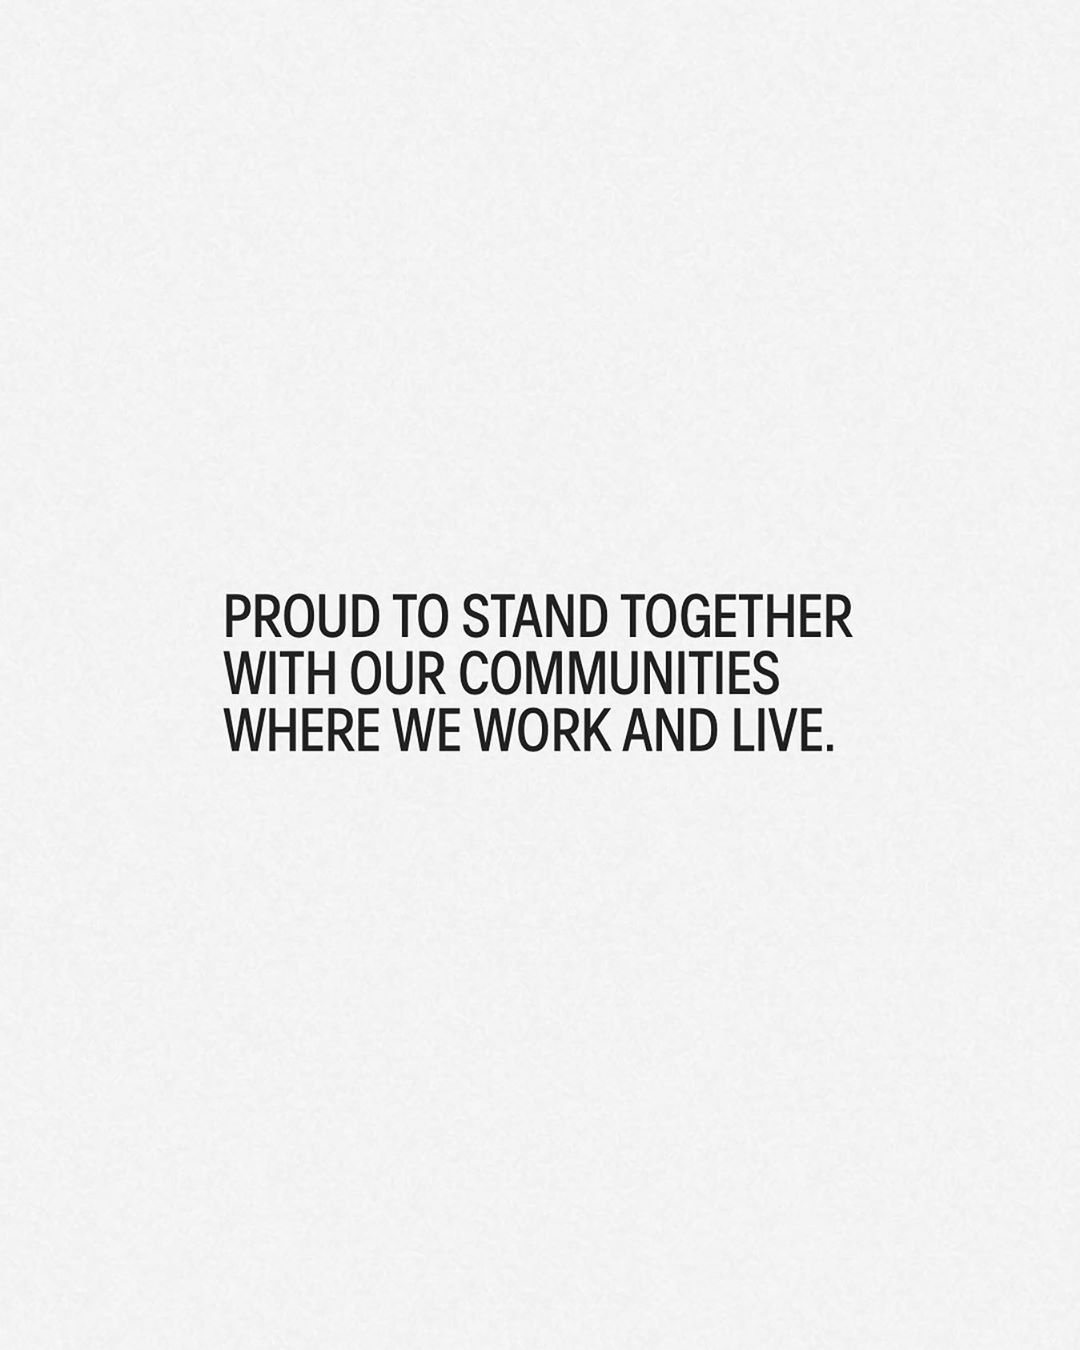 Proud to stand together with our communities where we work and live. ⠀⠀⠀⠀⠀⠀⠀⠀⠀⠀⠀⠀⠀⠀⠀⠀⠀⠀⠀⠀ ⠀⠀⠀⠀⠀⠀⠀⠀⠀⠀⠀⠀⠀⠀⠀⠀⠀⠀⠀⠀